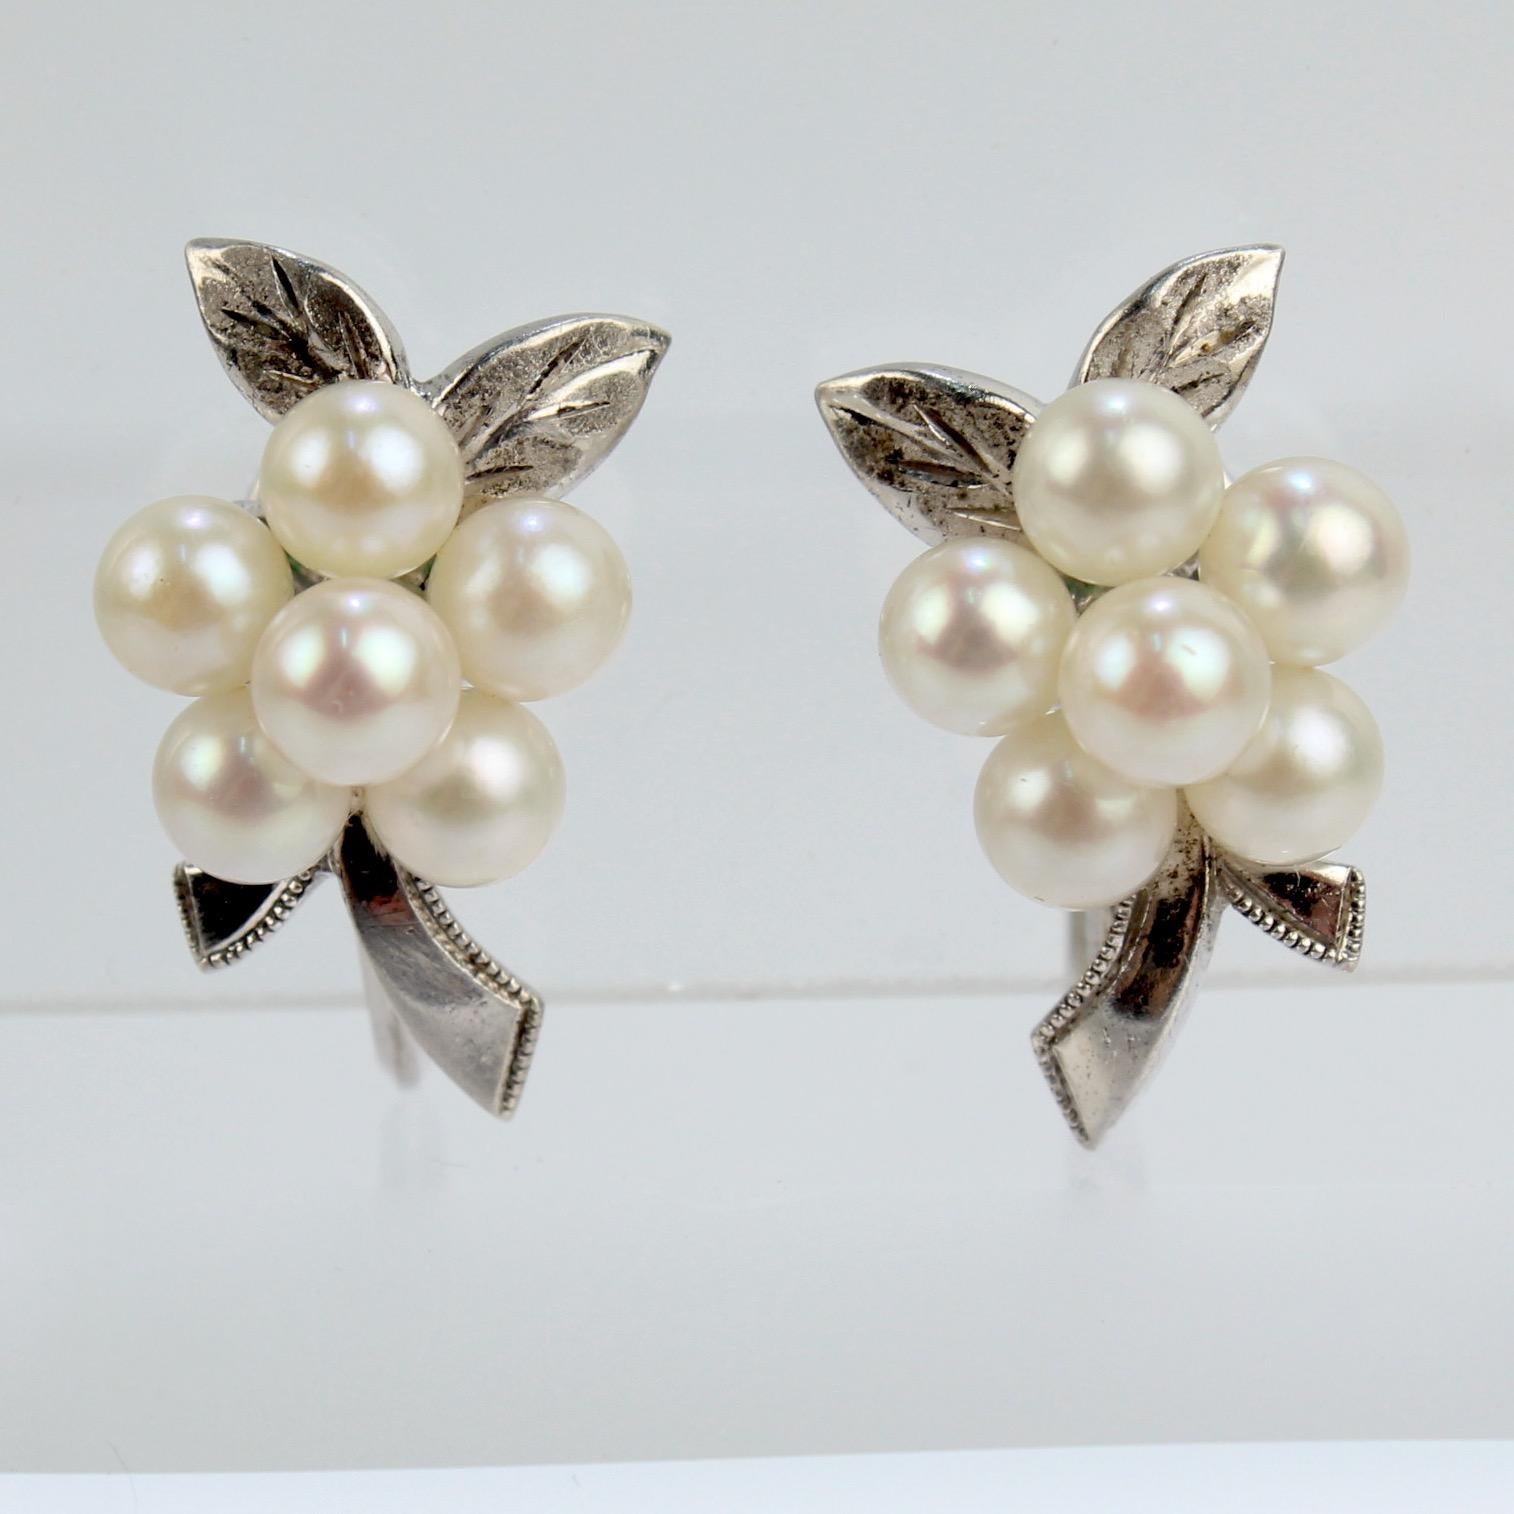 A very fine pair of vintage Mikimoto Akoya cultured pearl and sterling silver earrings.

Each with a pearl cluster set like a bouquet on two sterling silver leaves and stems.  

Secured with screw back closures. 

Wonderful Mikimoto